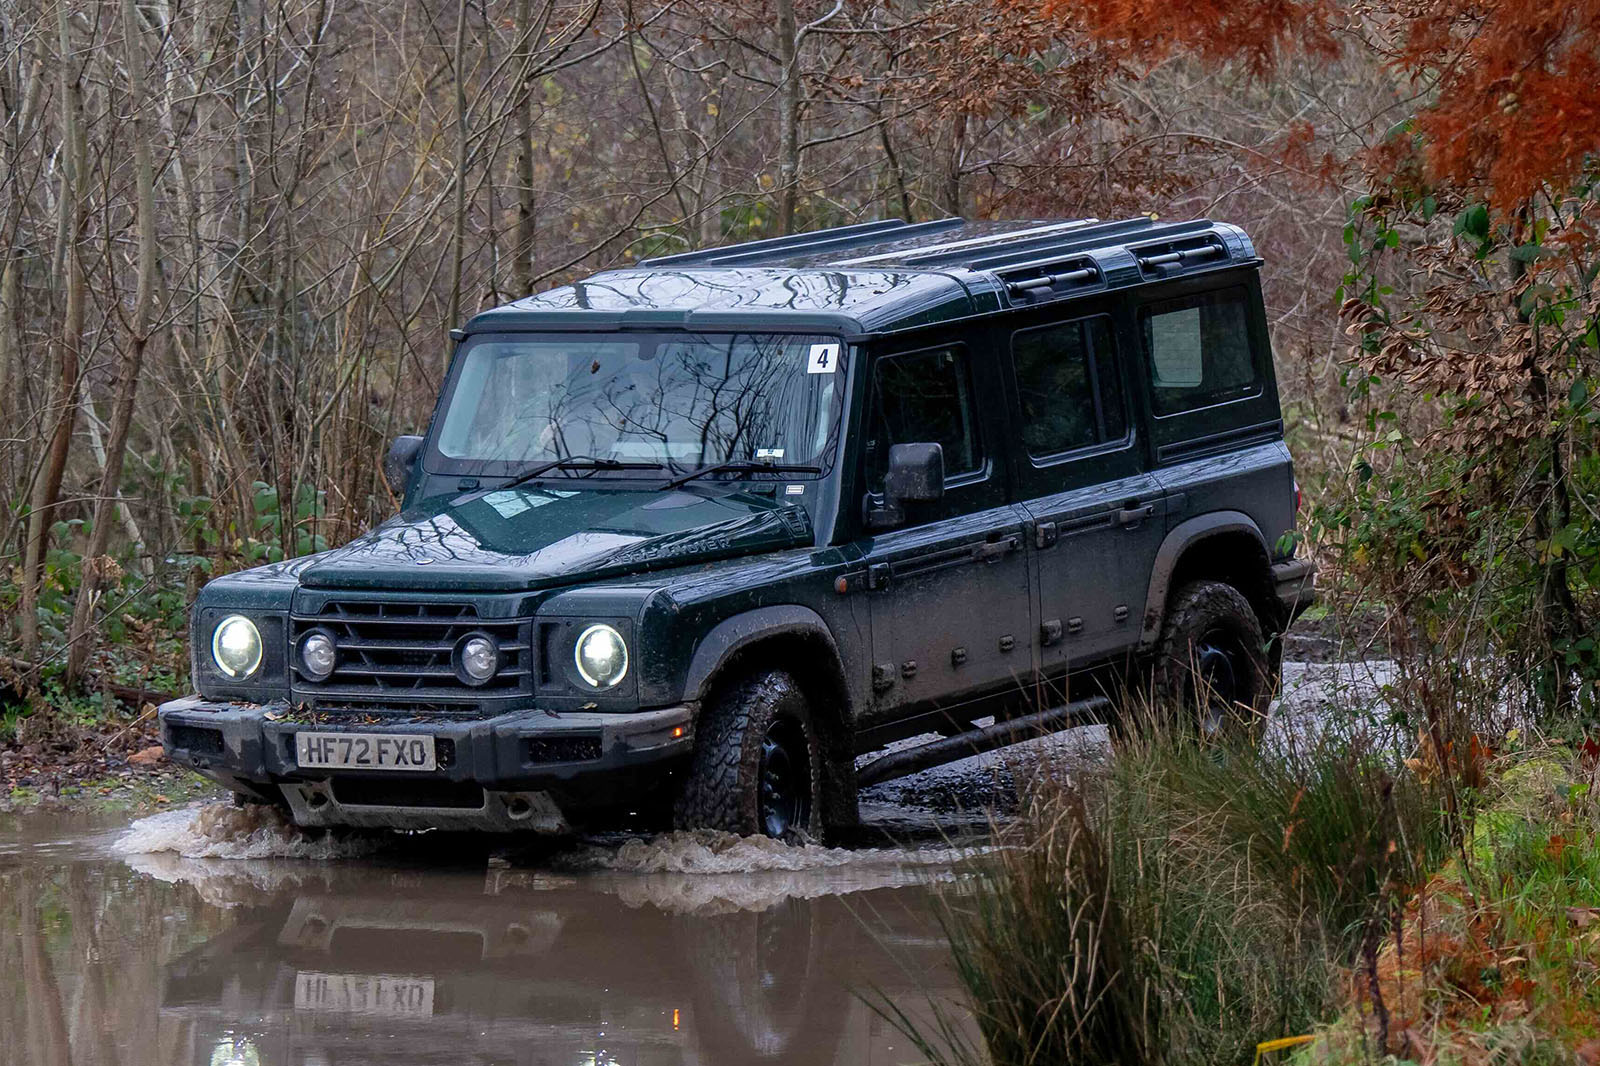 https://www.autocar.co.uk/sites/autocar.co.uk/files/ineos-grenadier-off-road-review-2023-07-wading.jpg